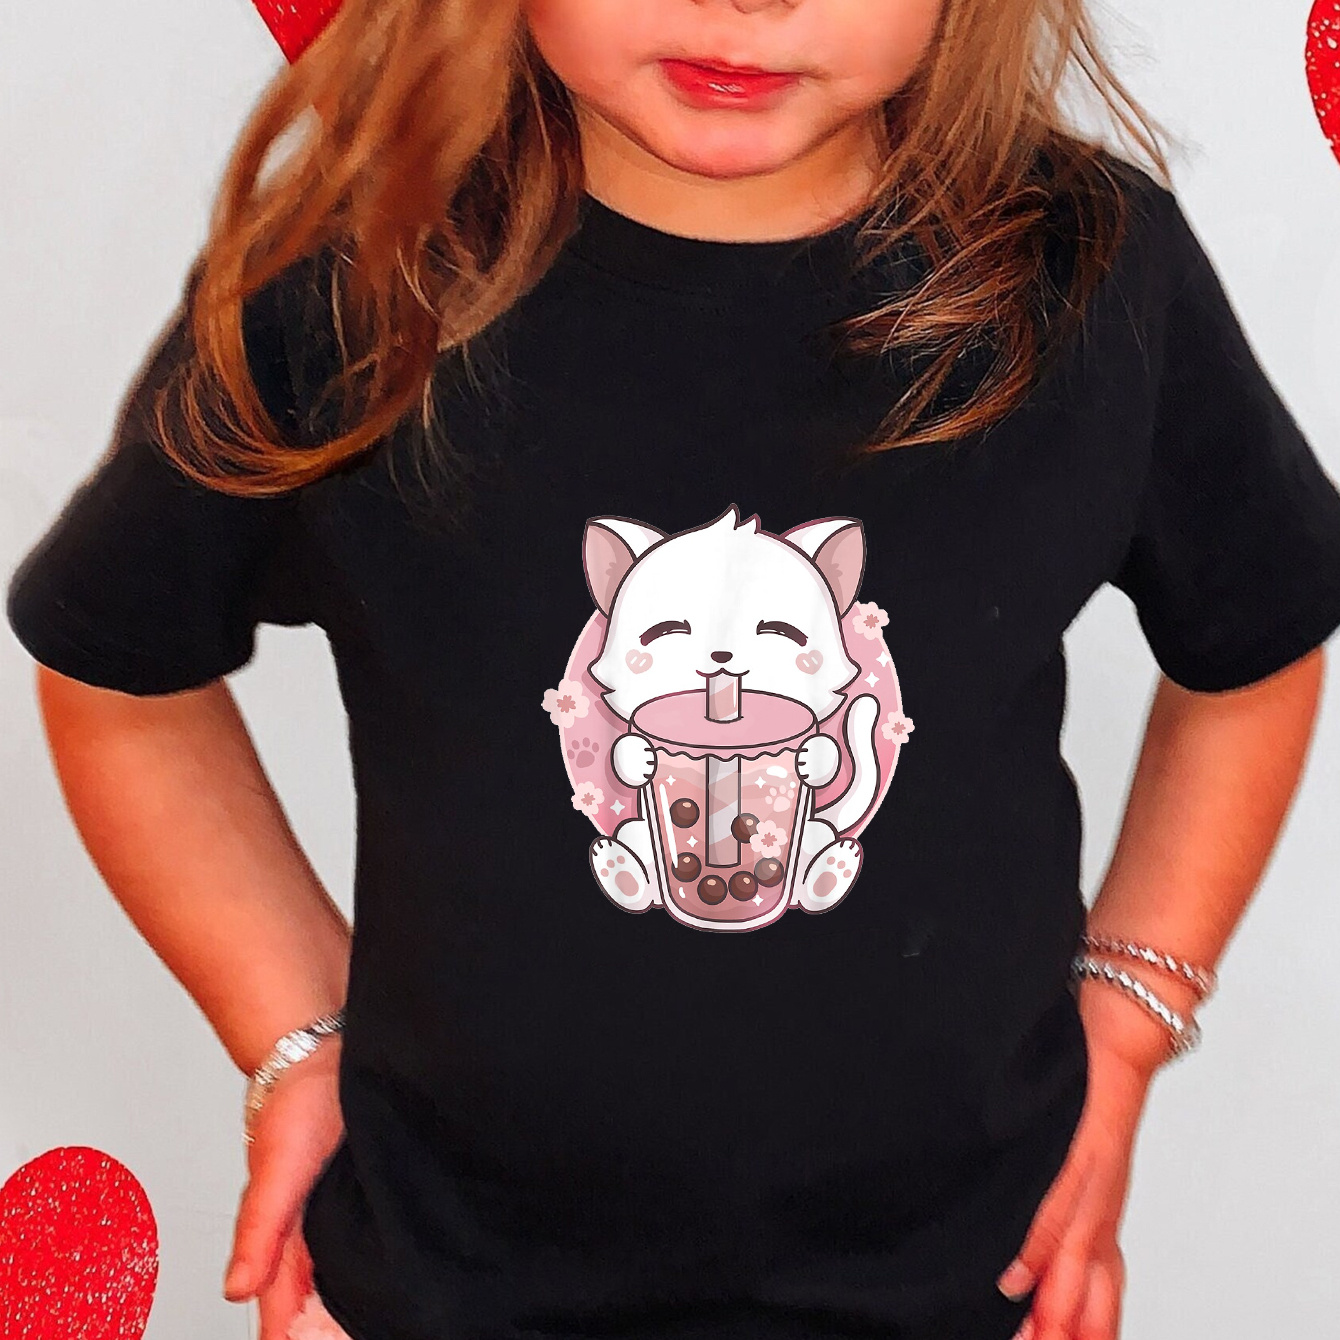 

Cat Loves Boba Tea Graphic Tees For Girls, Comfy Cotton Short Sleeve T-shirt For Casual Outdoor, Kids Summer Clothes